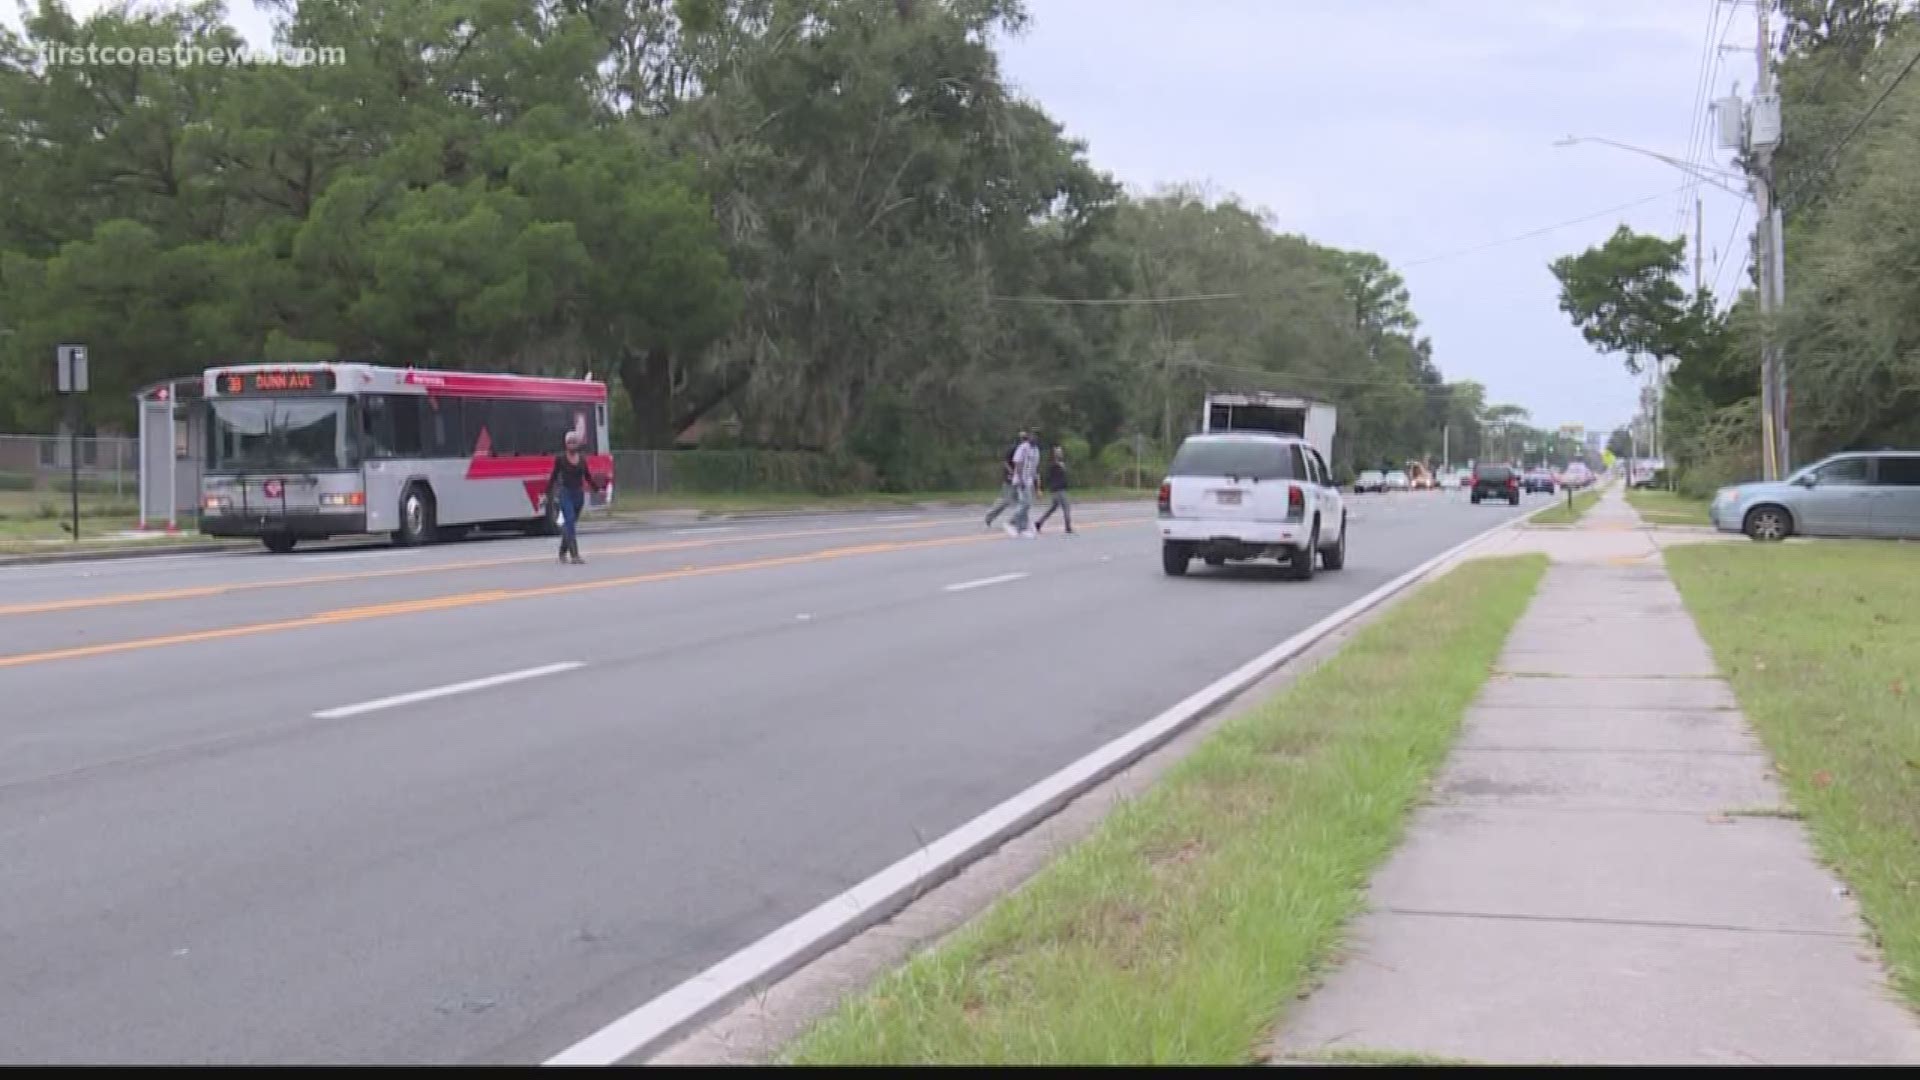 FHP says Michael Chaco was trying to cross Dunn Avenue to get to his bus stop when he was struck.